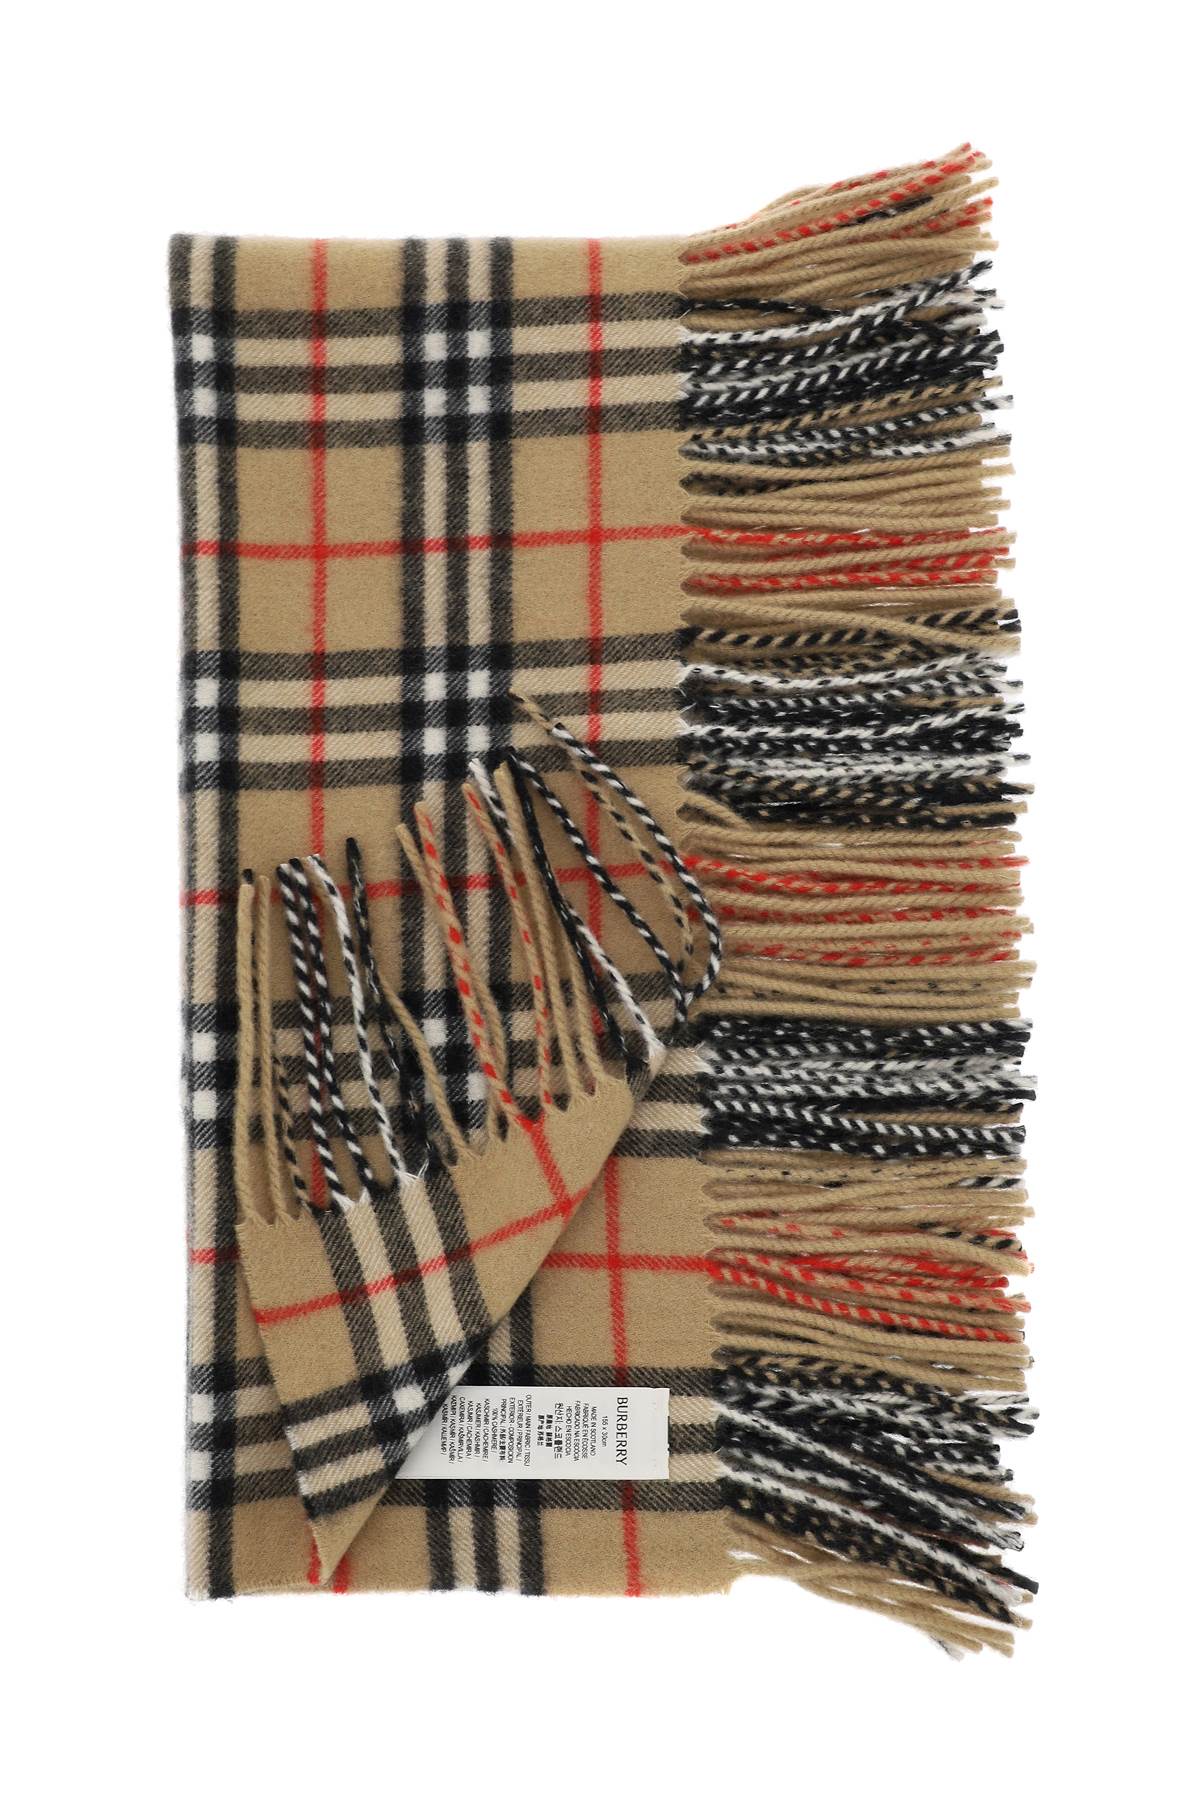 BURBERRY Luxurious Tan Cashmere Scarf for All Seasons